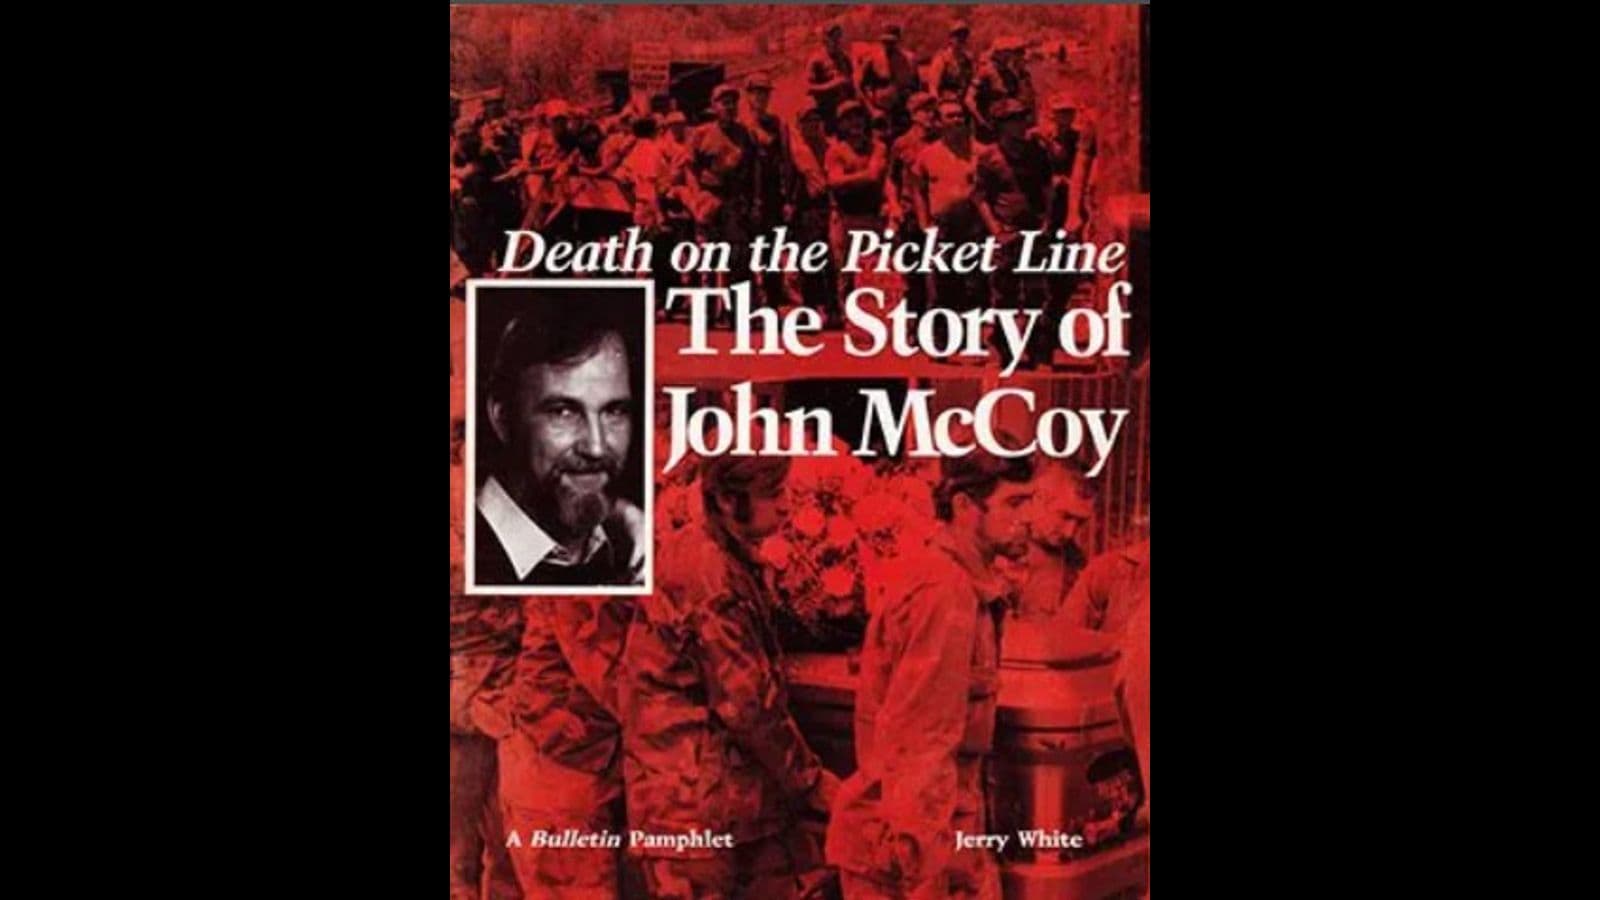 Death on the Picket Line: The Story of John McCoy, by Jerry White.